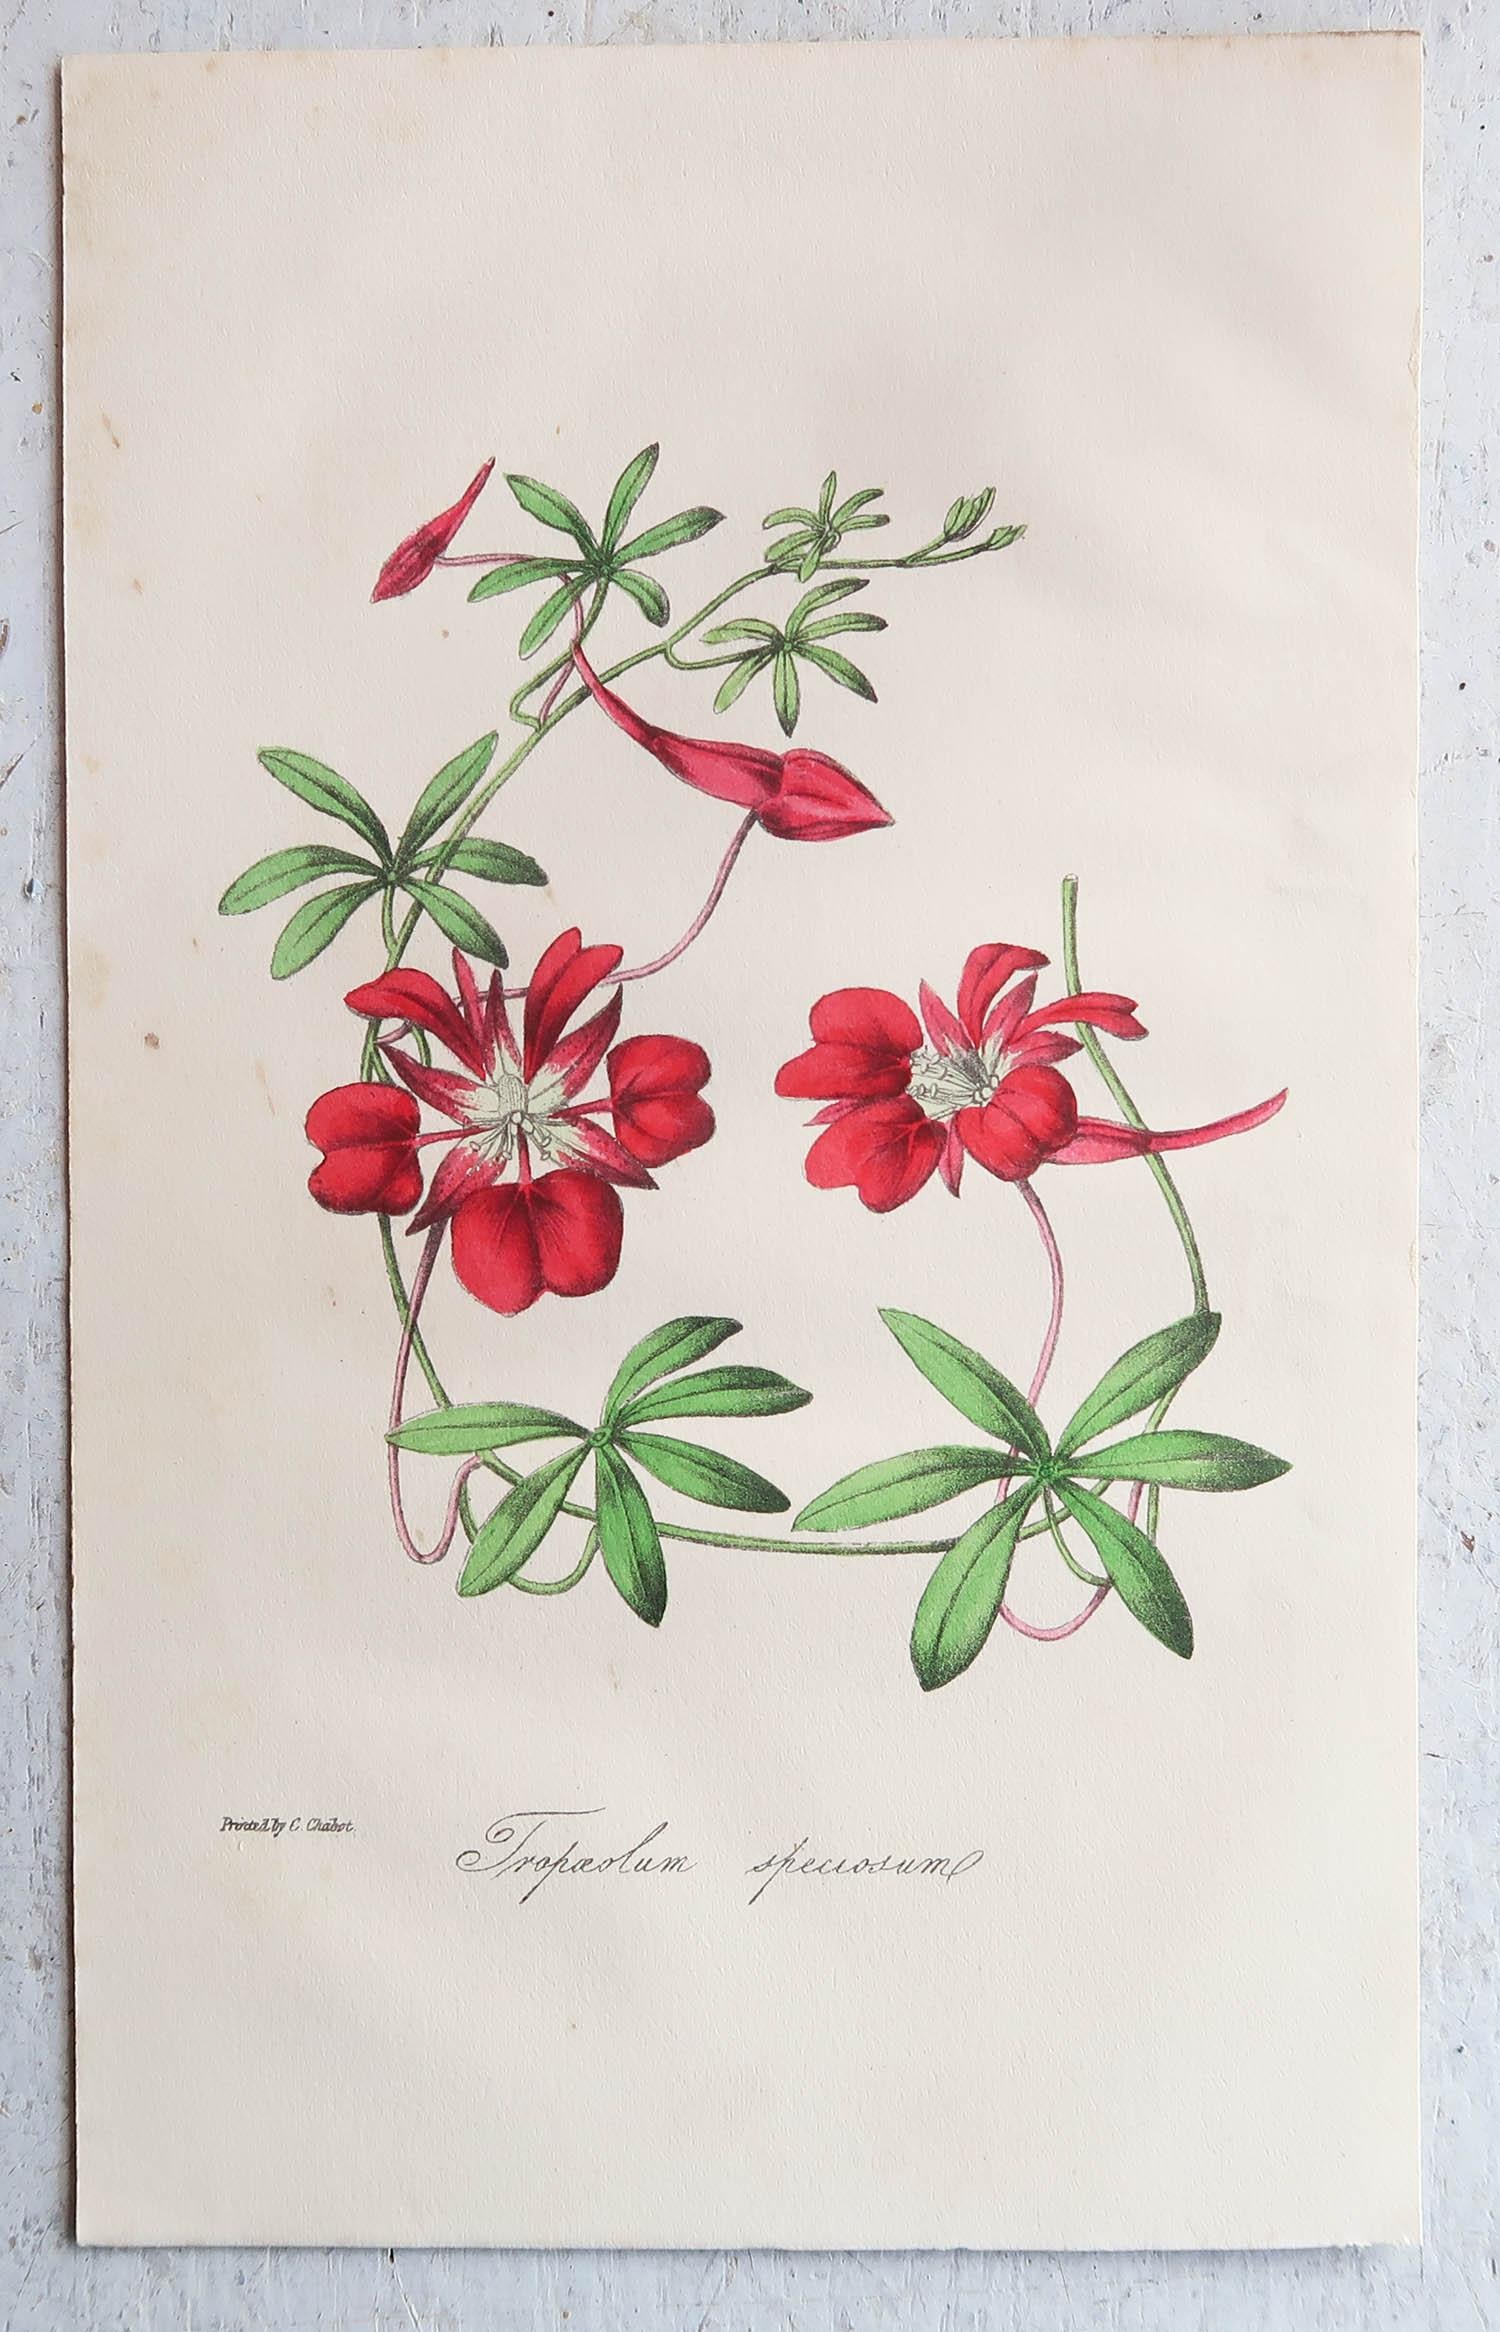 Wonderful set of 12 botanical prints.

Lithographs by Alfred Adlard, J.Parkin and D.Hayes

After C.W Harrison and Miss E.Hogg

Original hand color

Published, circa 1840

Unframed.

The measurement given is for one print.

Free UK shipping





